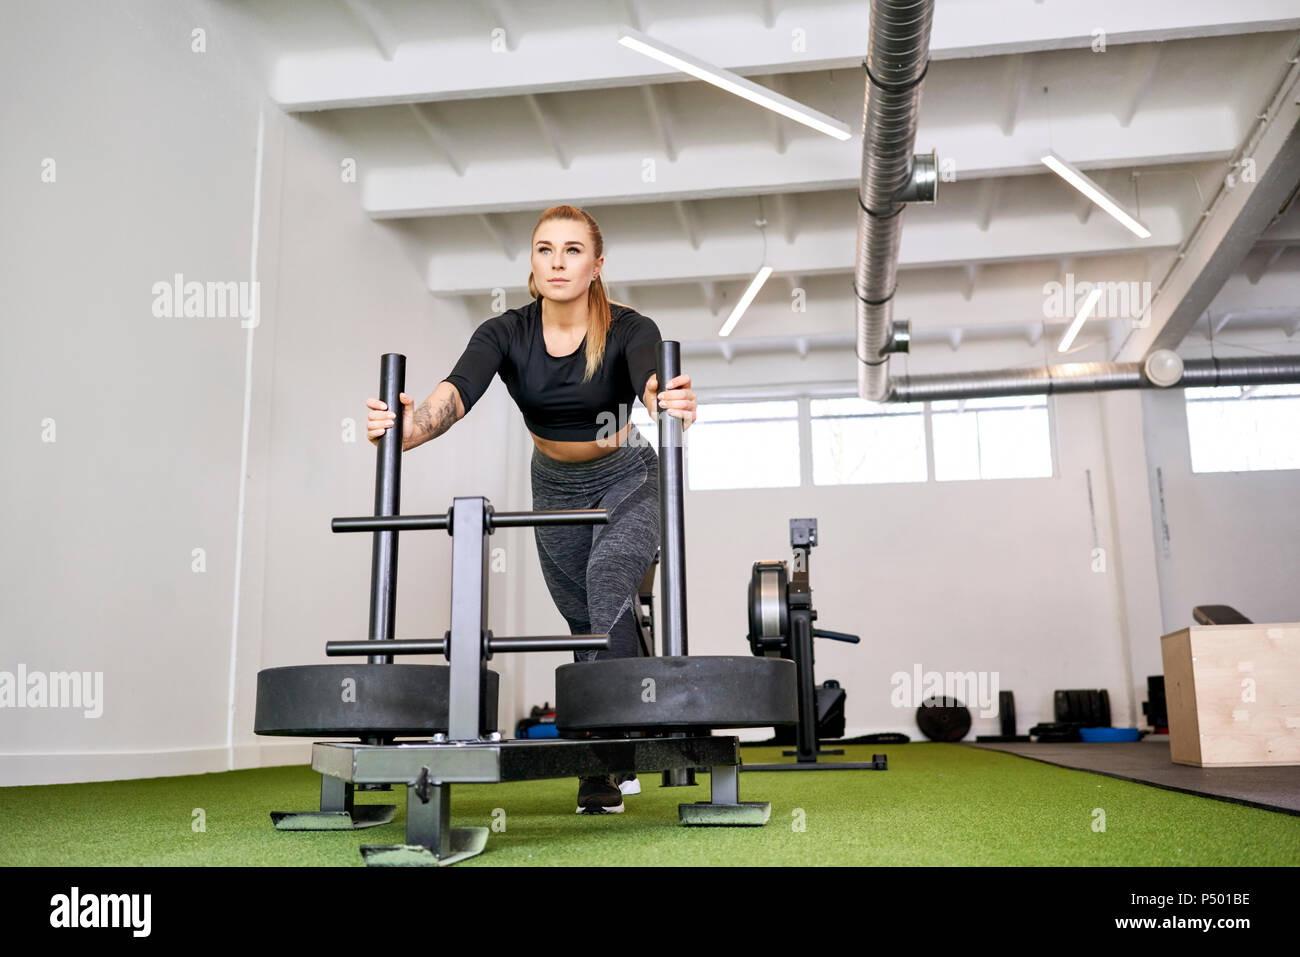 Woman pushing weight sled at gym Stock Photo